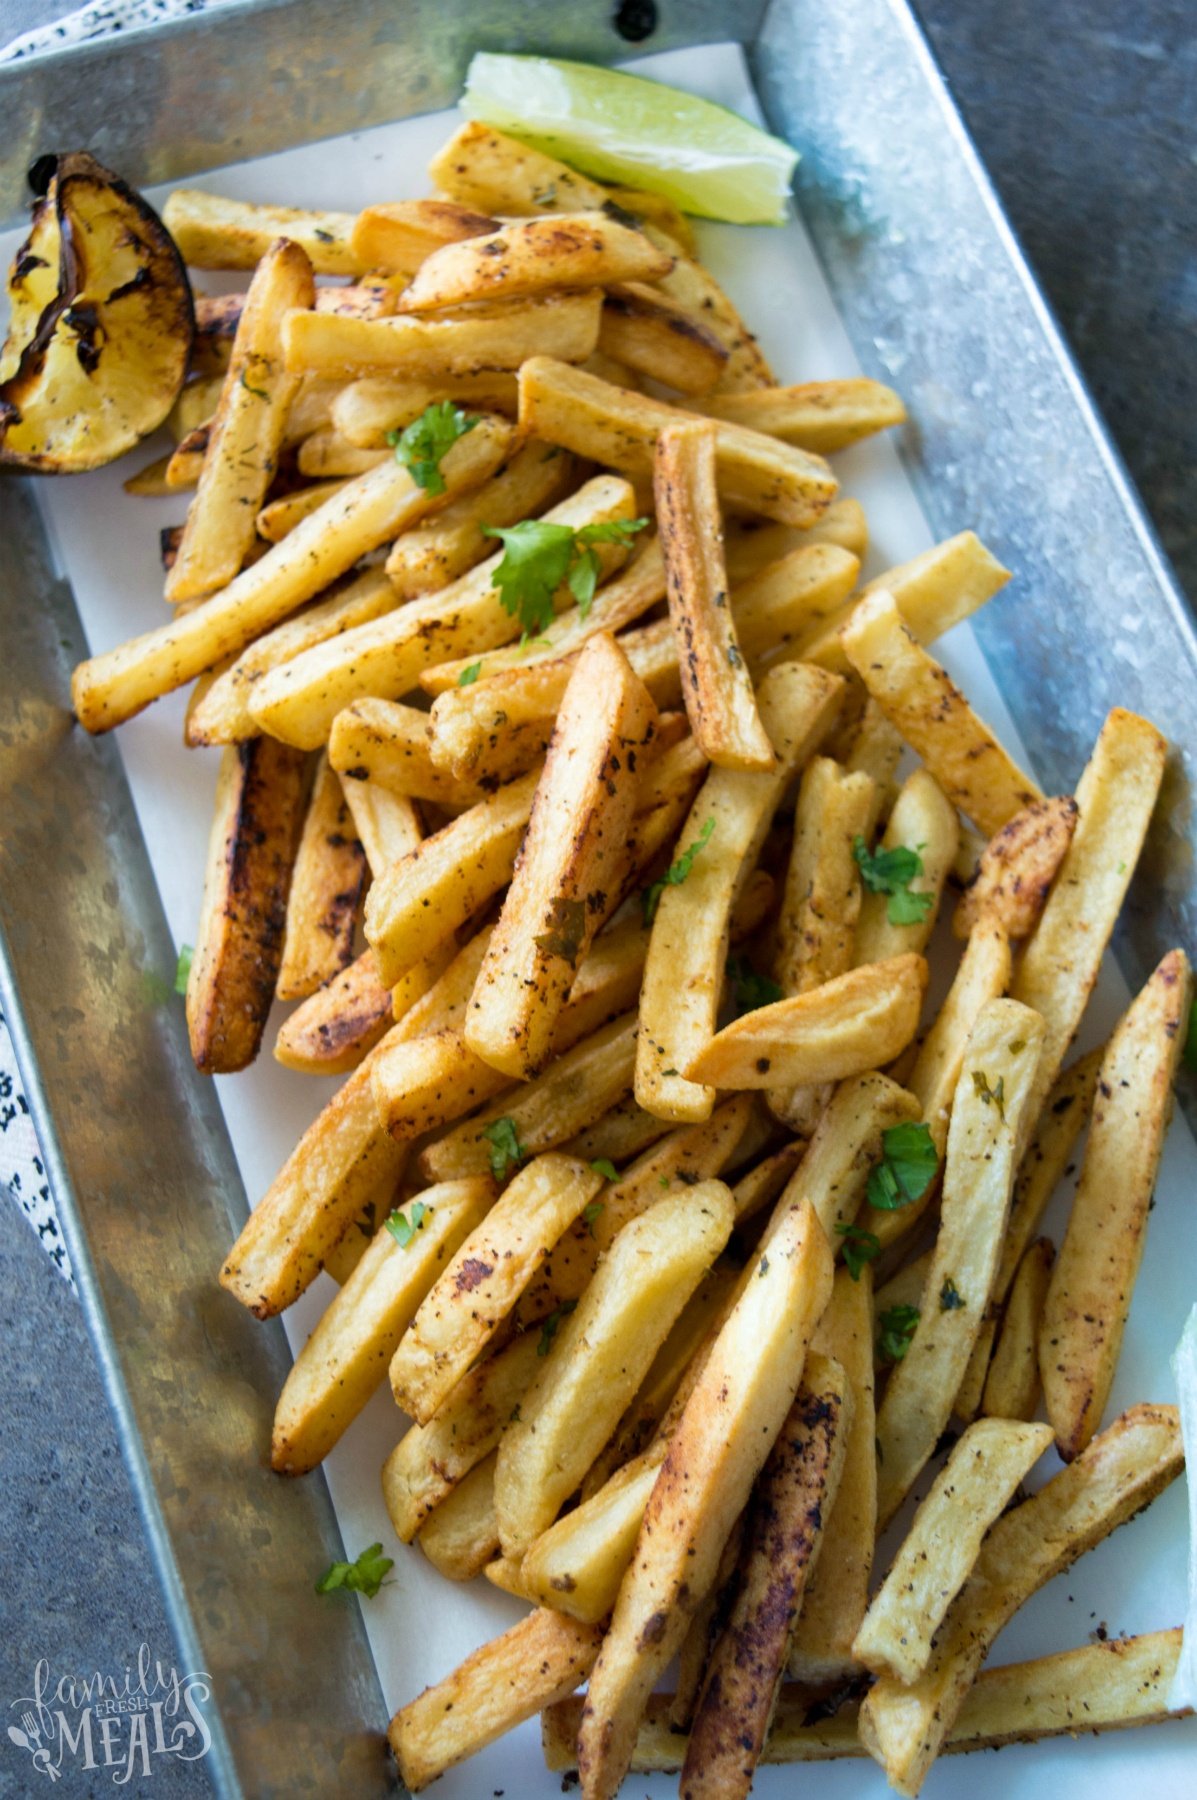 Cilantro Lime French Fries Recipe - Family Fresh Meals